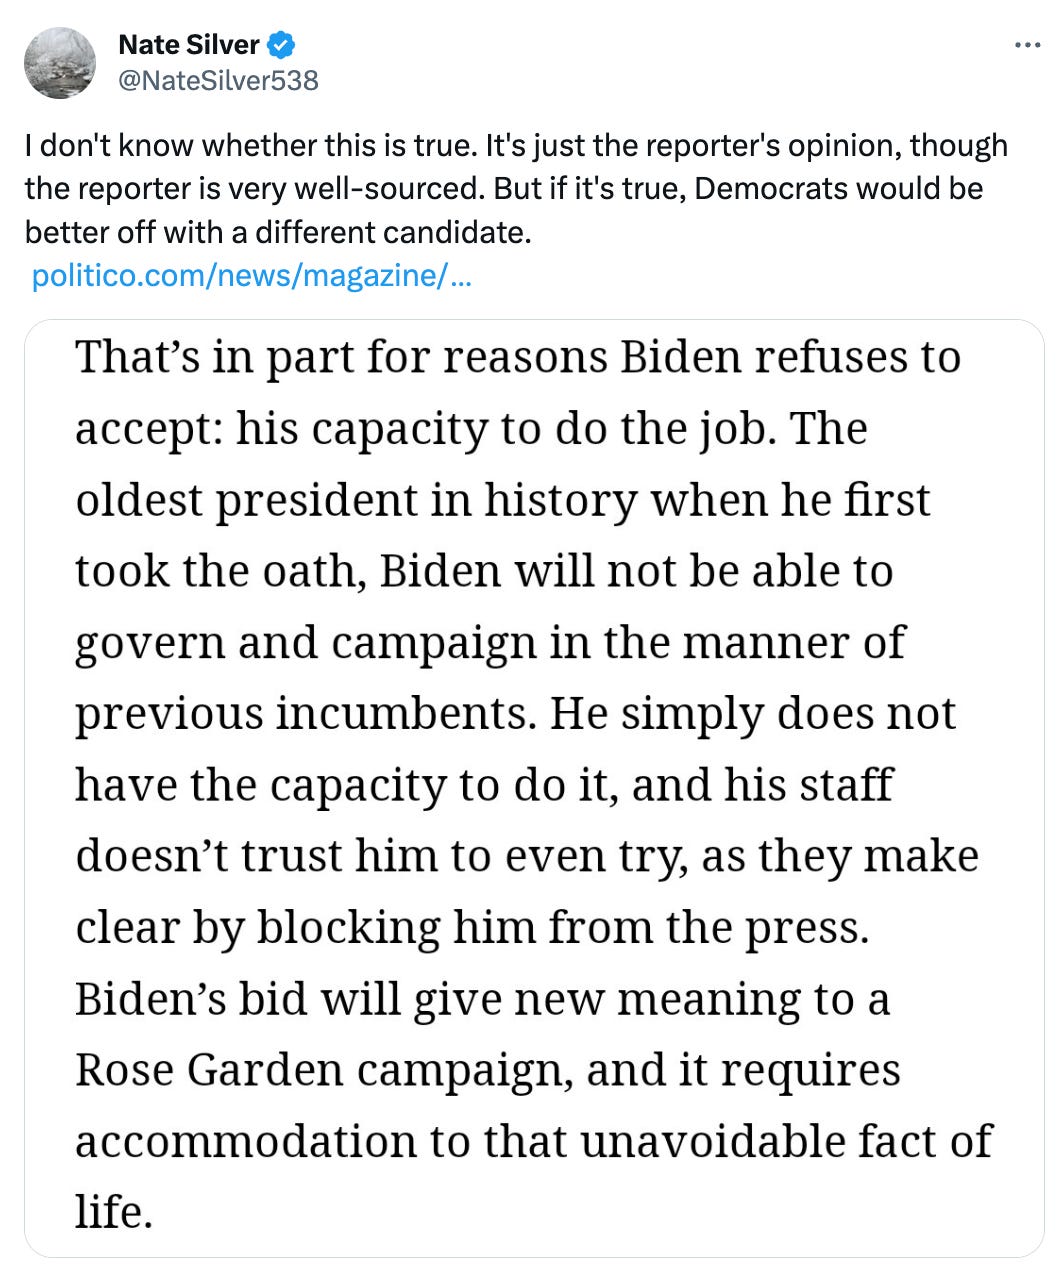  Nate Silver @NateSilver538 I don't know whether this is true. It's just the reporter's opinion, though the reporter is very well-sourced. But if it's true, Democrats would be better off with a different candidate.  https://politico.com/news/magazine/2023/11/13/biden-2024-reelection-challenges-strategy-00126776